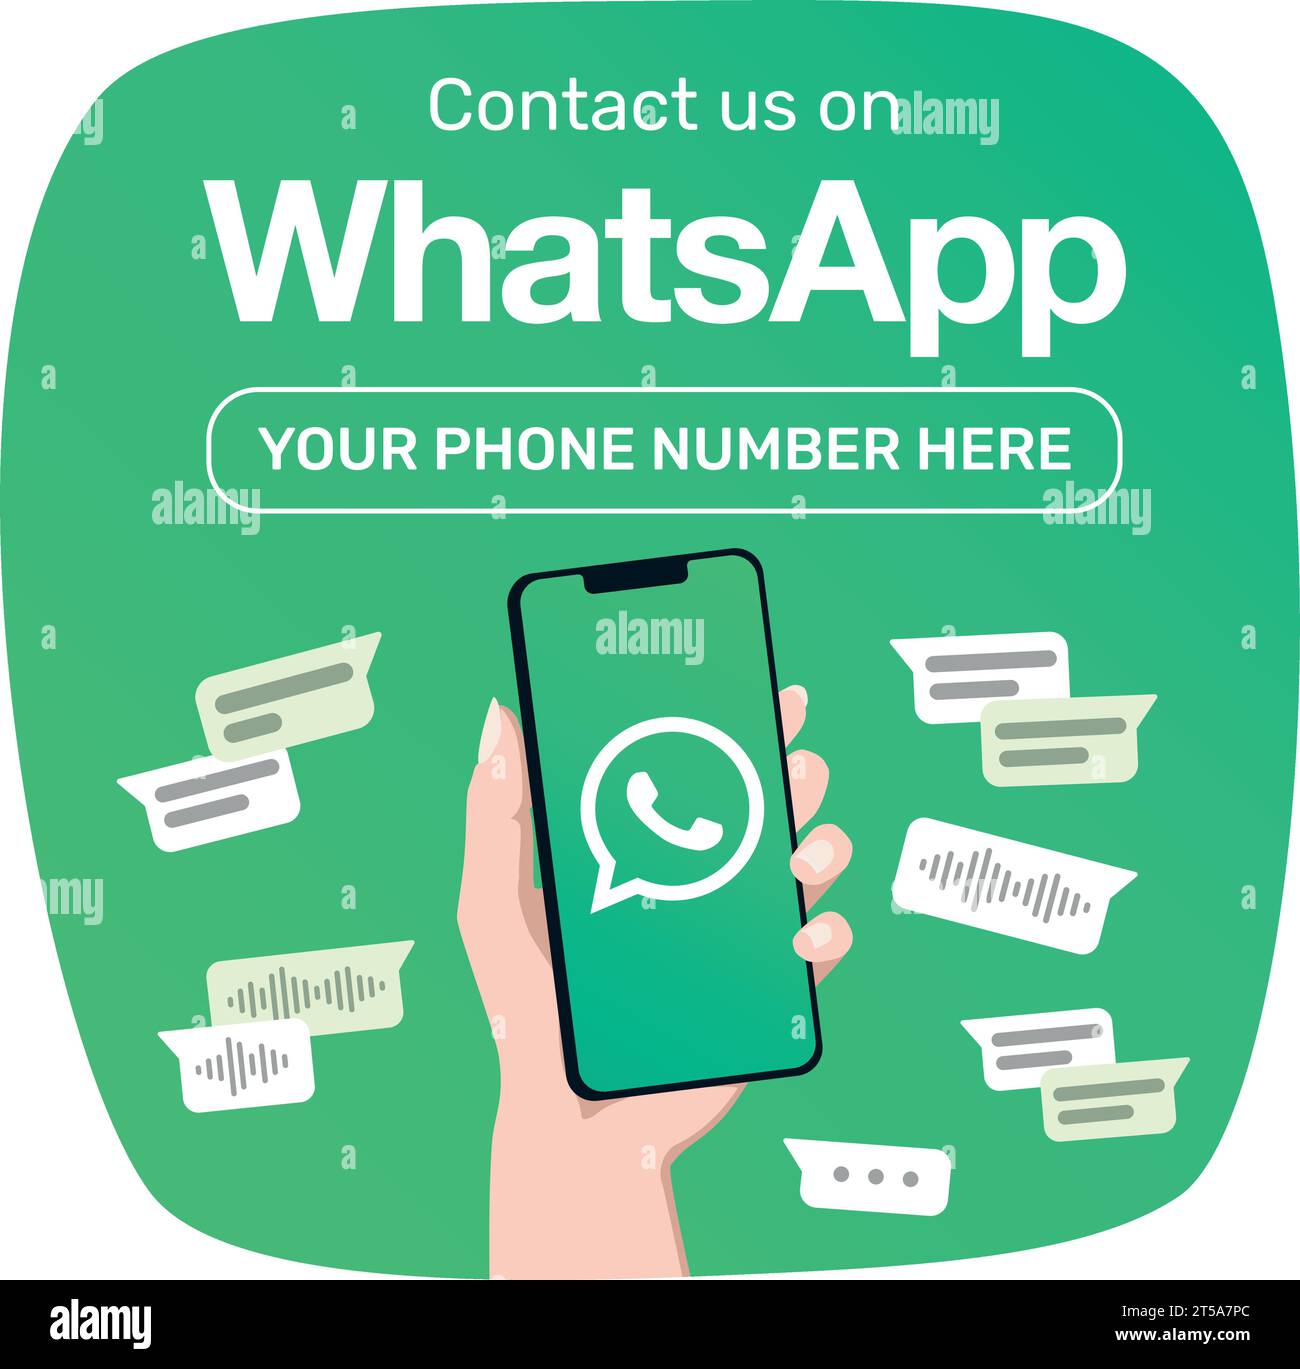 whatsapp square banner template. Contact us on our whats app number. Illustration of a woman hand holding a phone with a logotype. Stock Vector